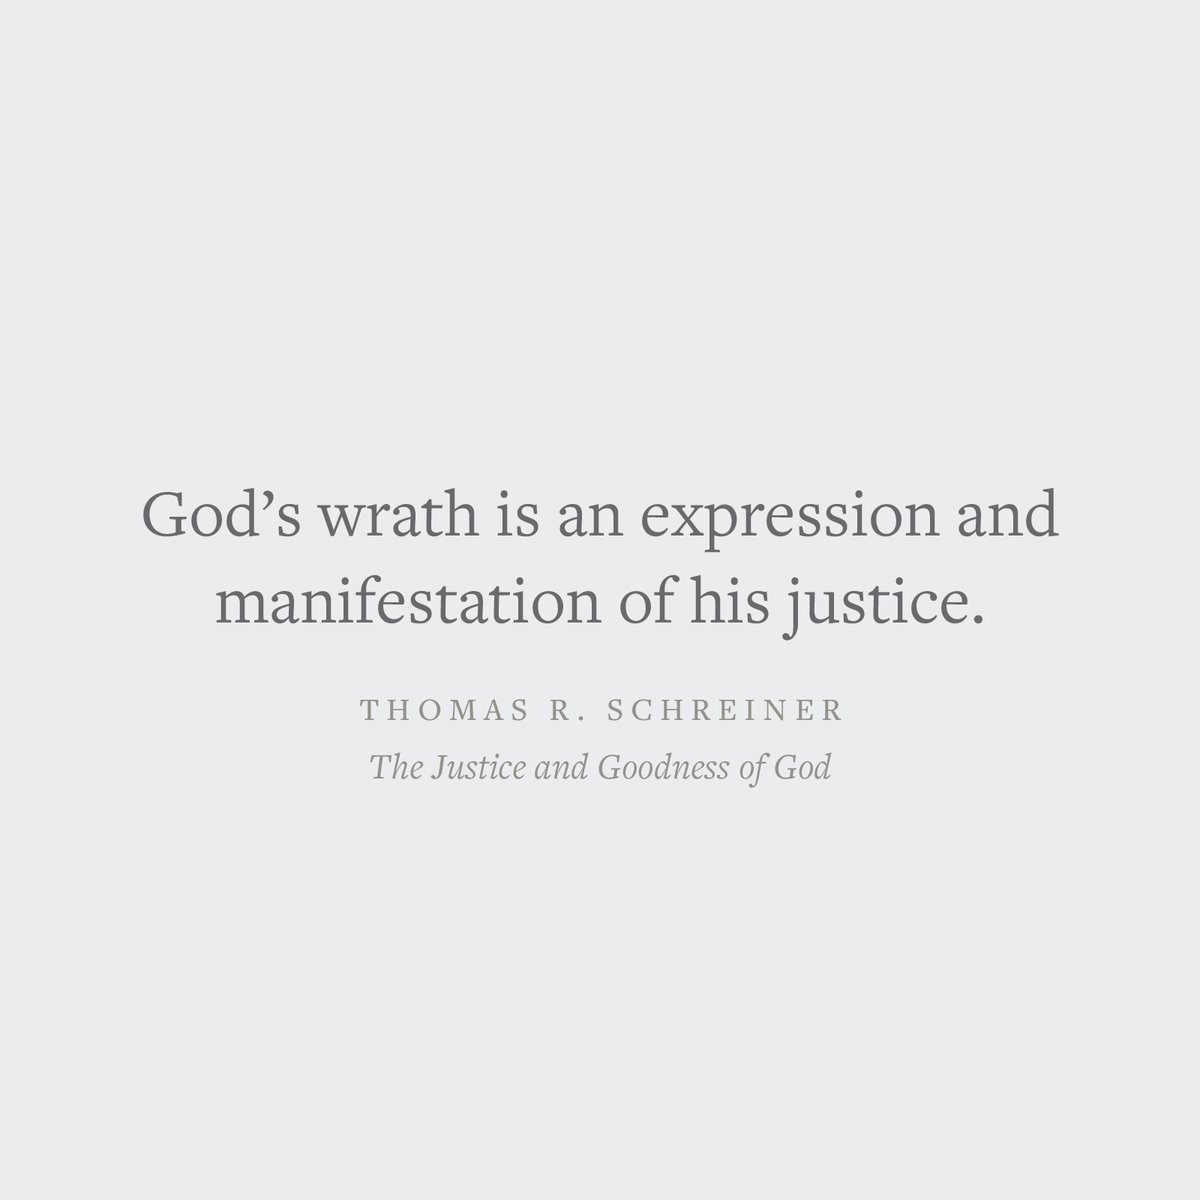 'God's wrath is an expression and manifestation of his justice.' —Thomas R. Schreiner Crossway.org/thejusticeandg…